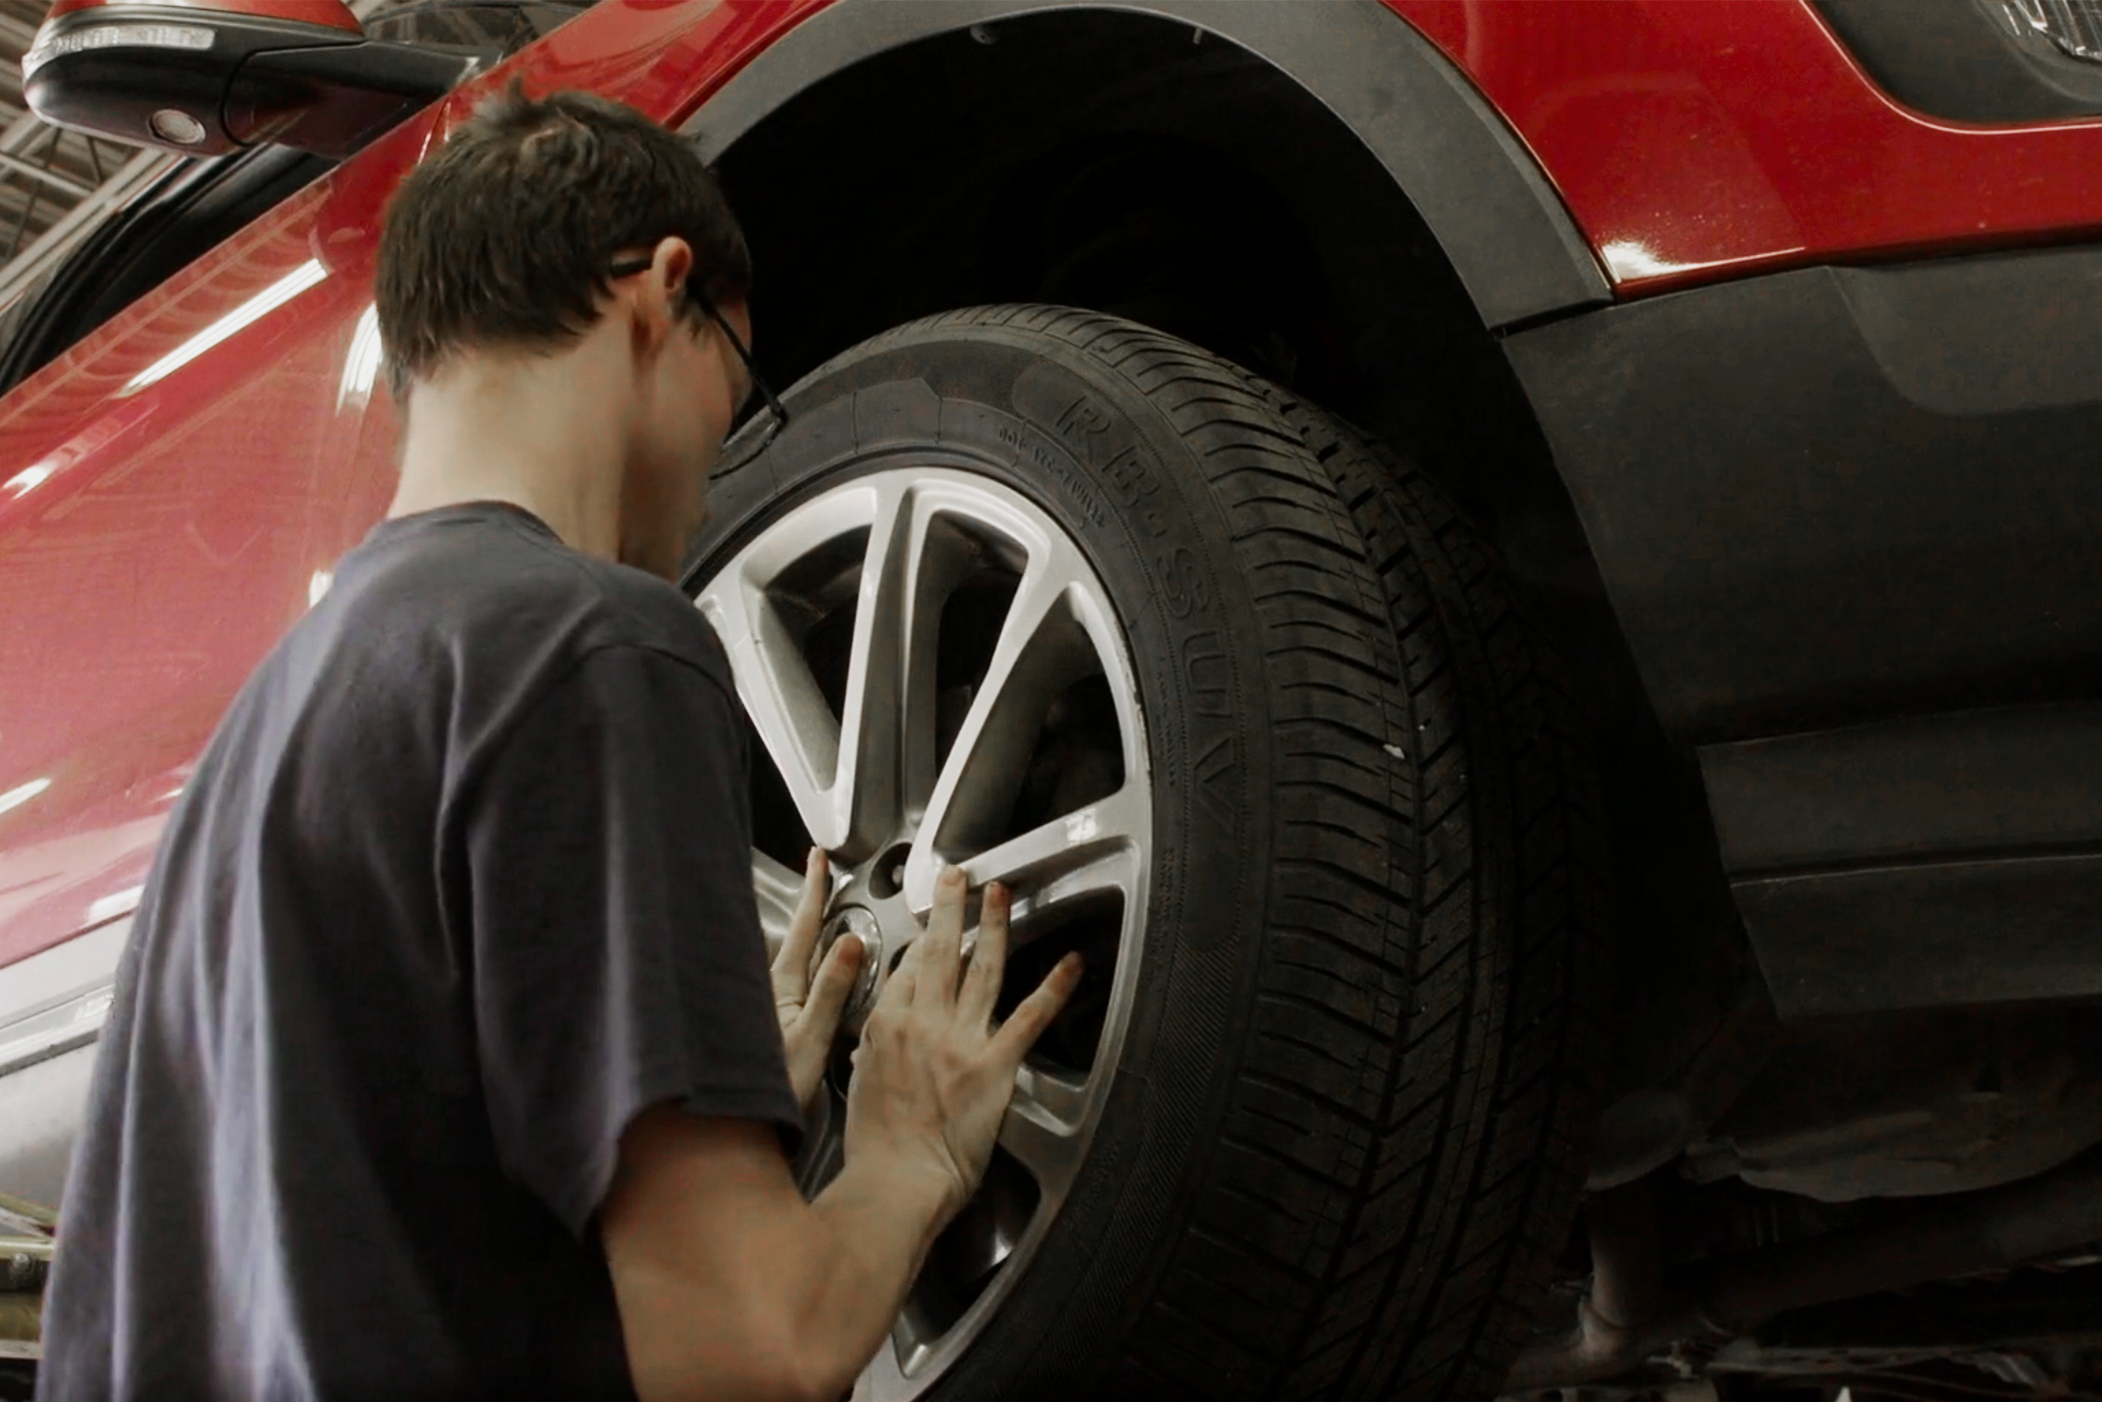 Automtove Technology student putting tire on vehicle